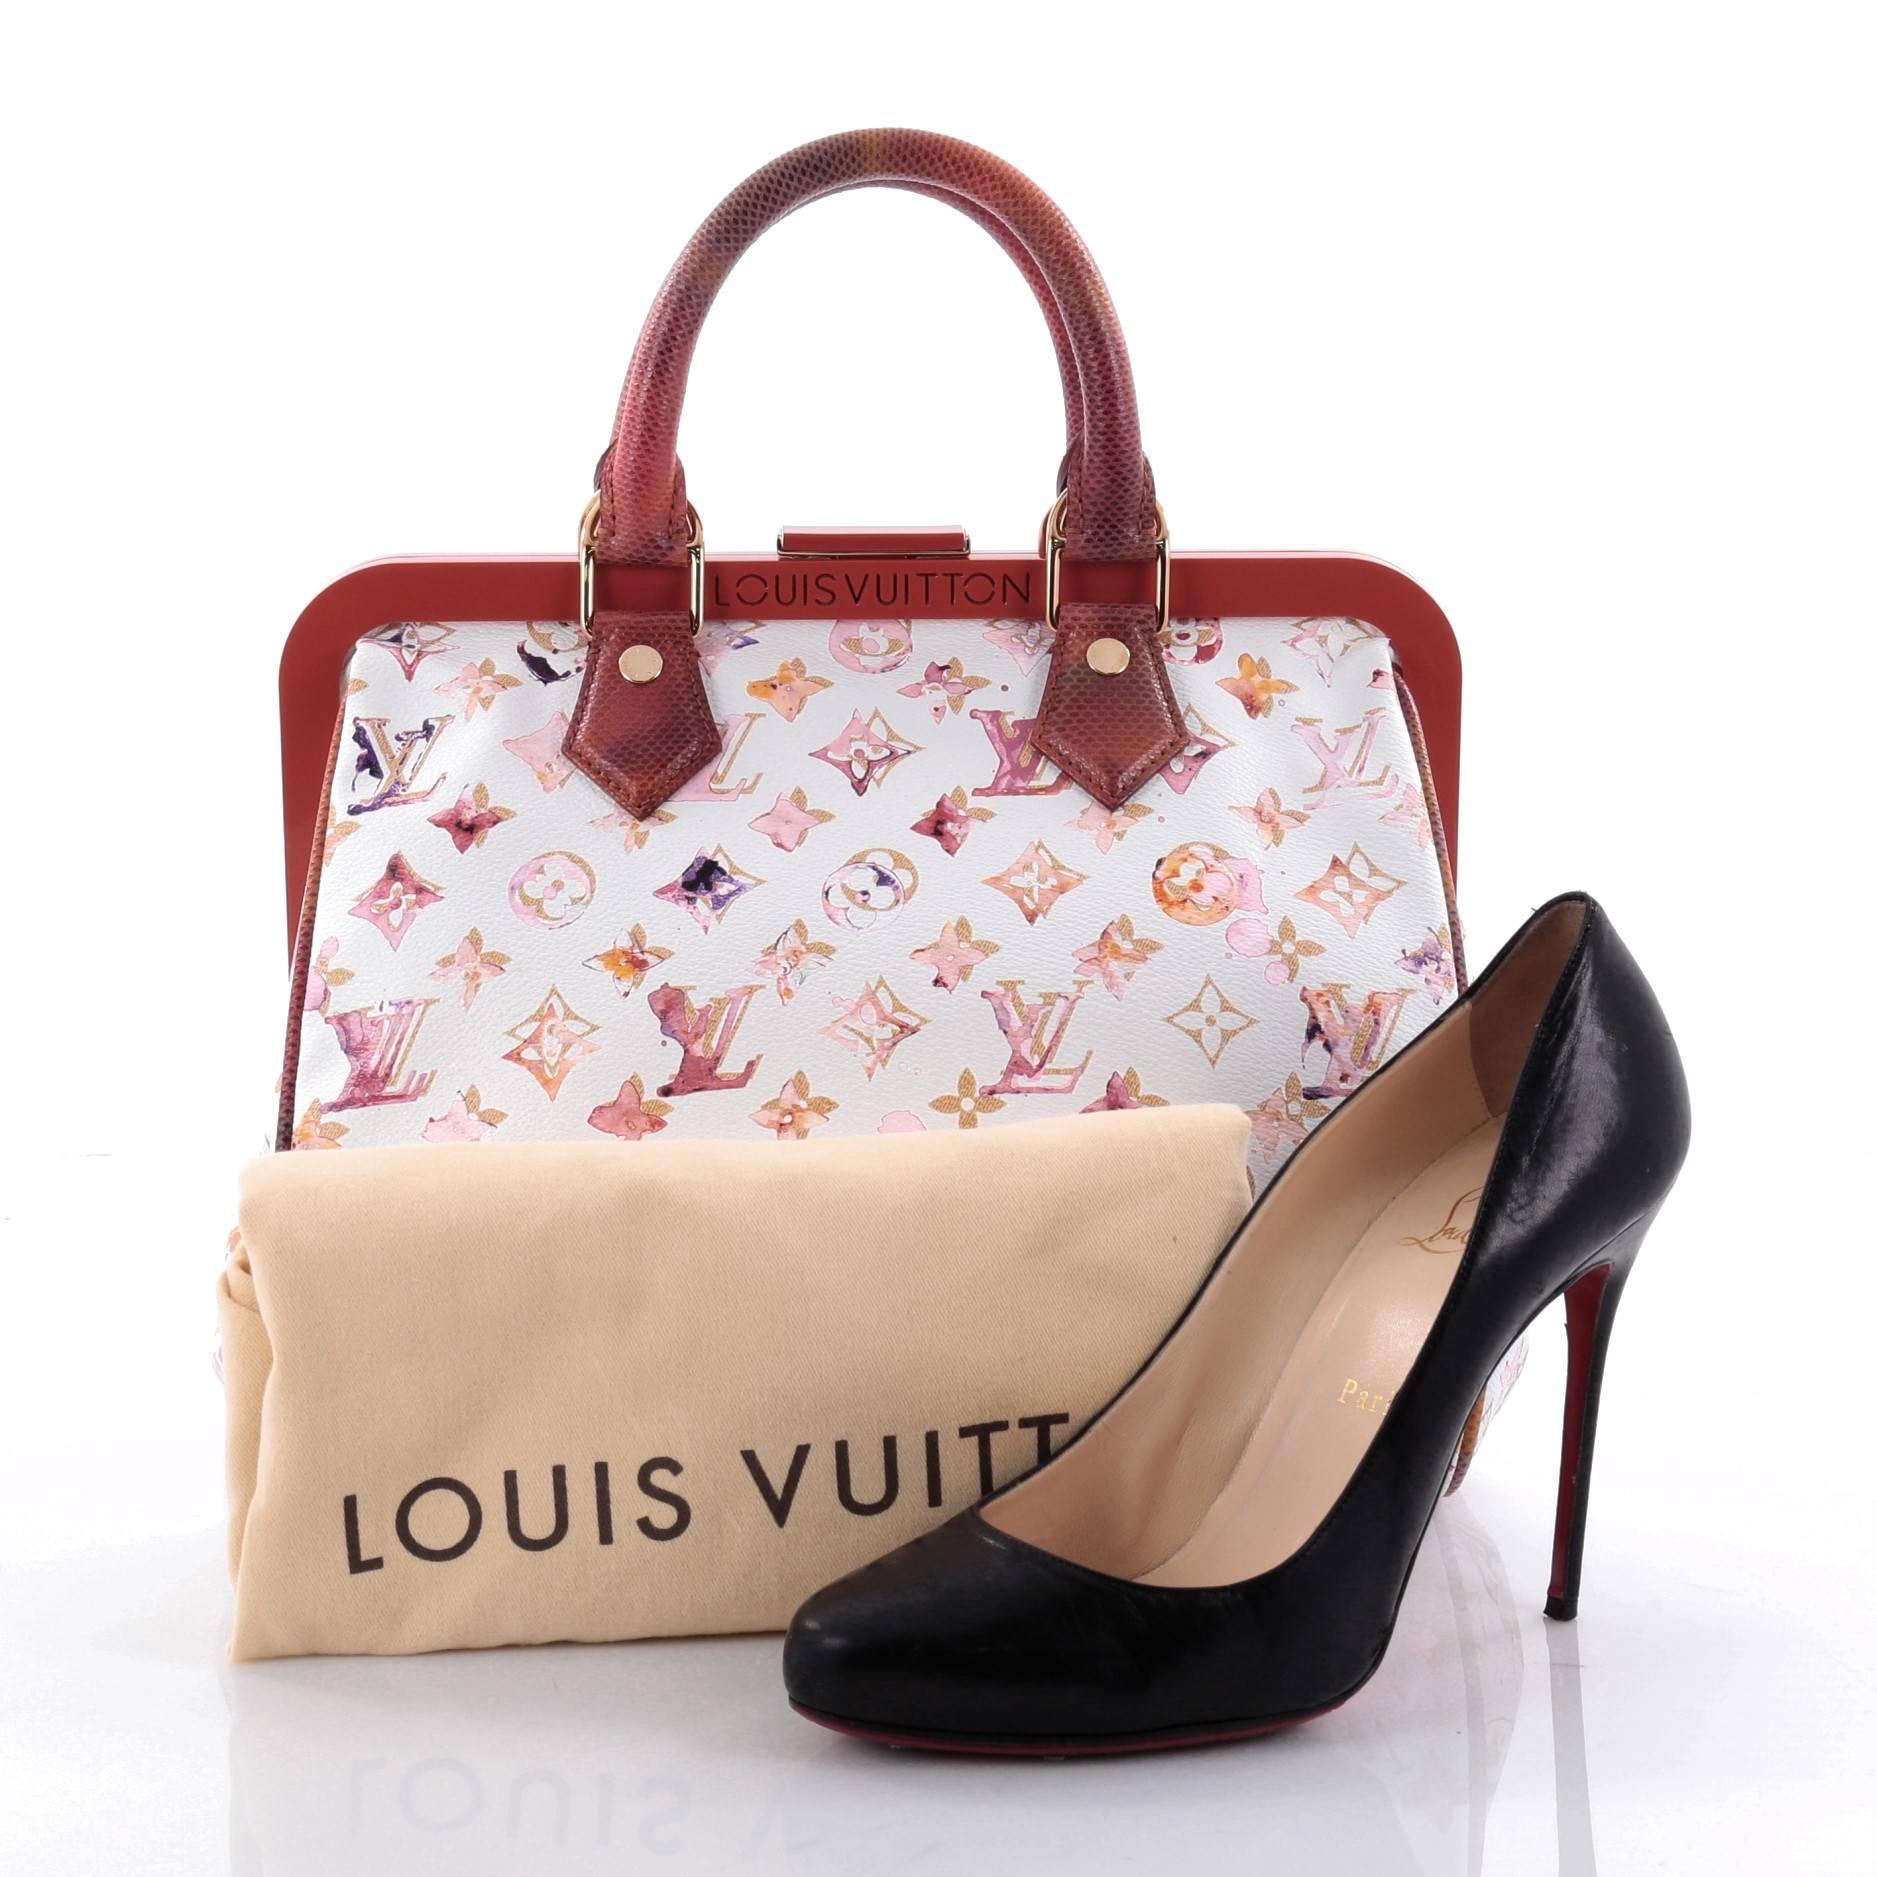 This authentic Louis Vuitton Frame Speedy Bag Limited Edition Aquarelle Monogram Canvas 30 is an ultra-rare piece first seen on the runway of Marc Jacob's Spring/Summer 2008 Collection. Crafted from pink and white monogram watercolor canvas with